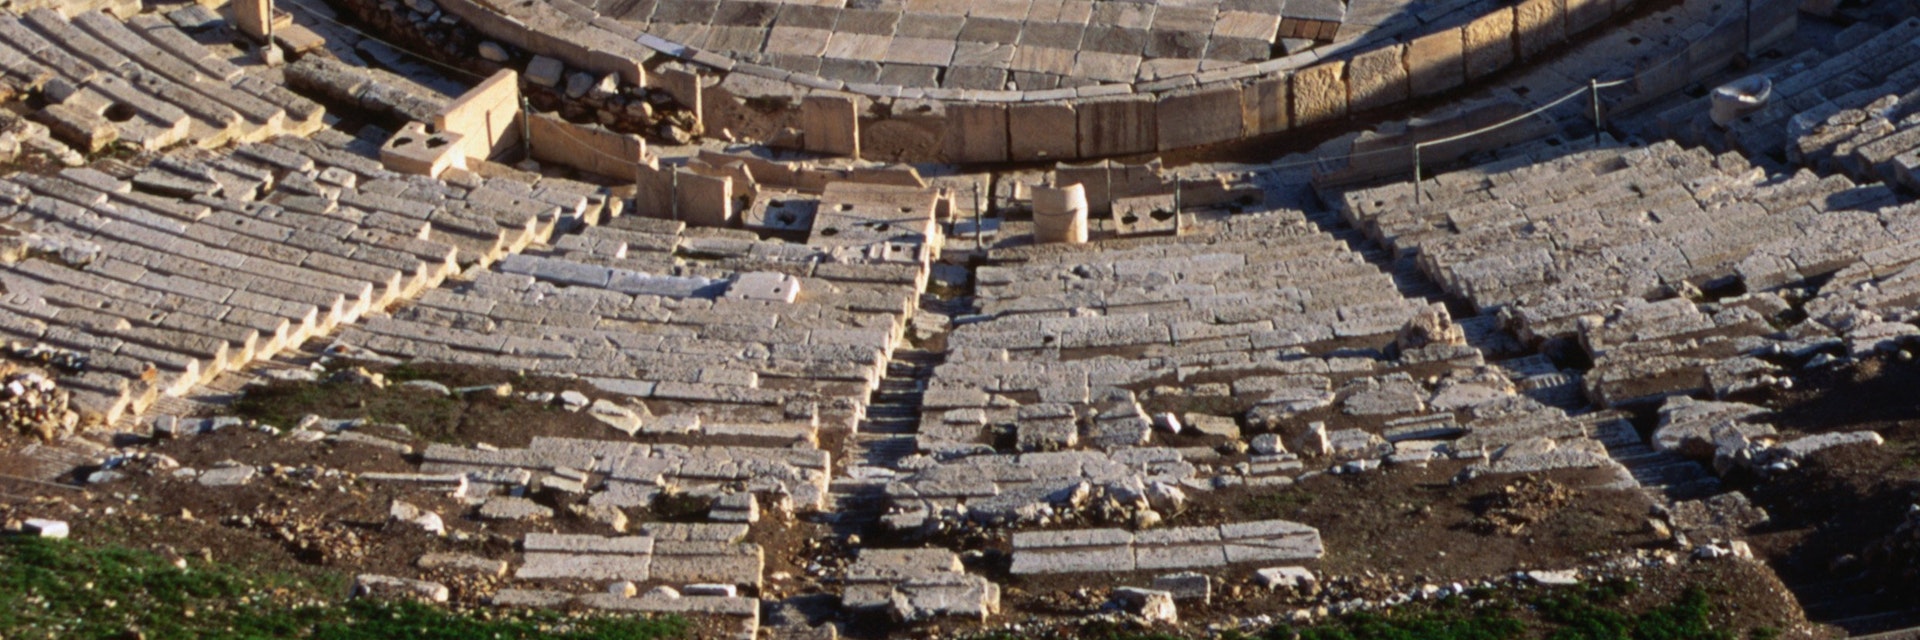 Theatre of Dionysos, showing its architectural evolution and transformation from the fifth century B.C. through the Roman Imperial period, on the south slope of the Acropolis, Athens.